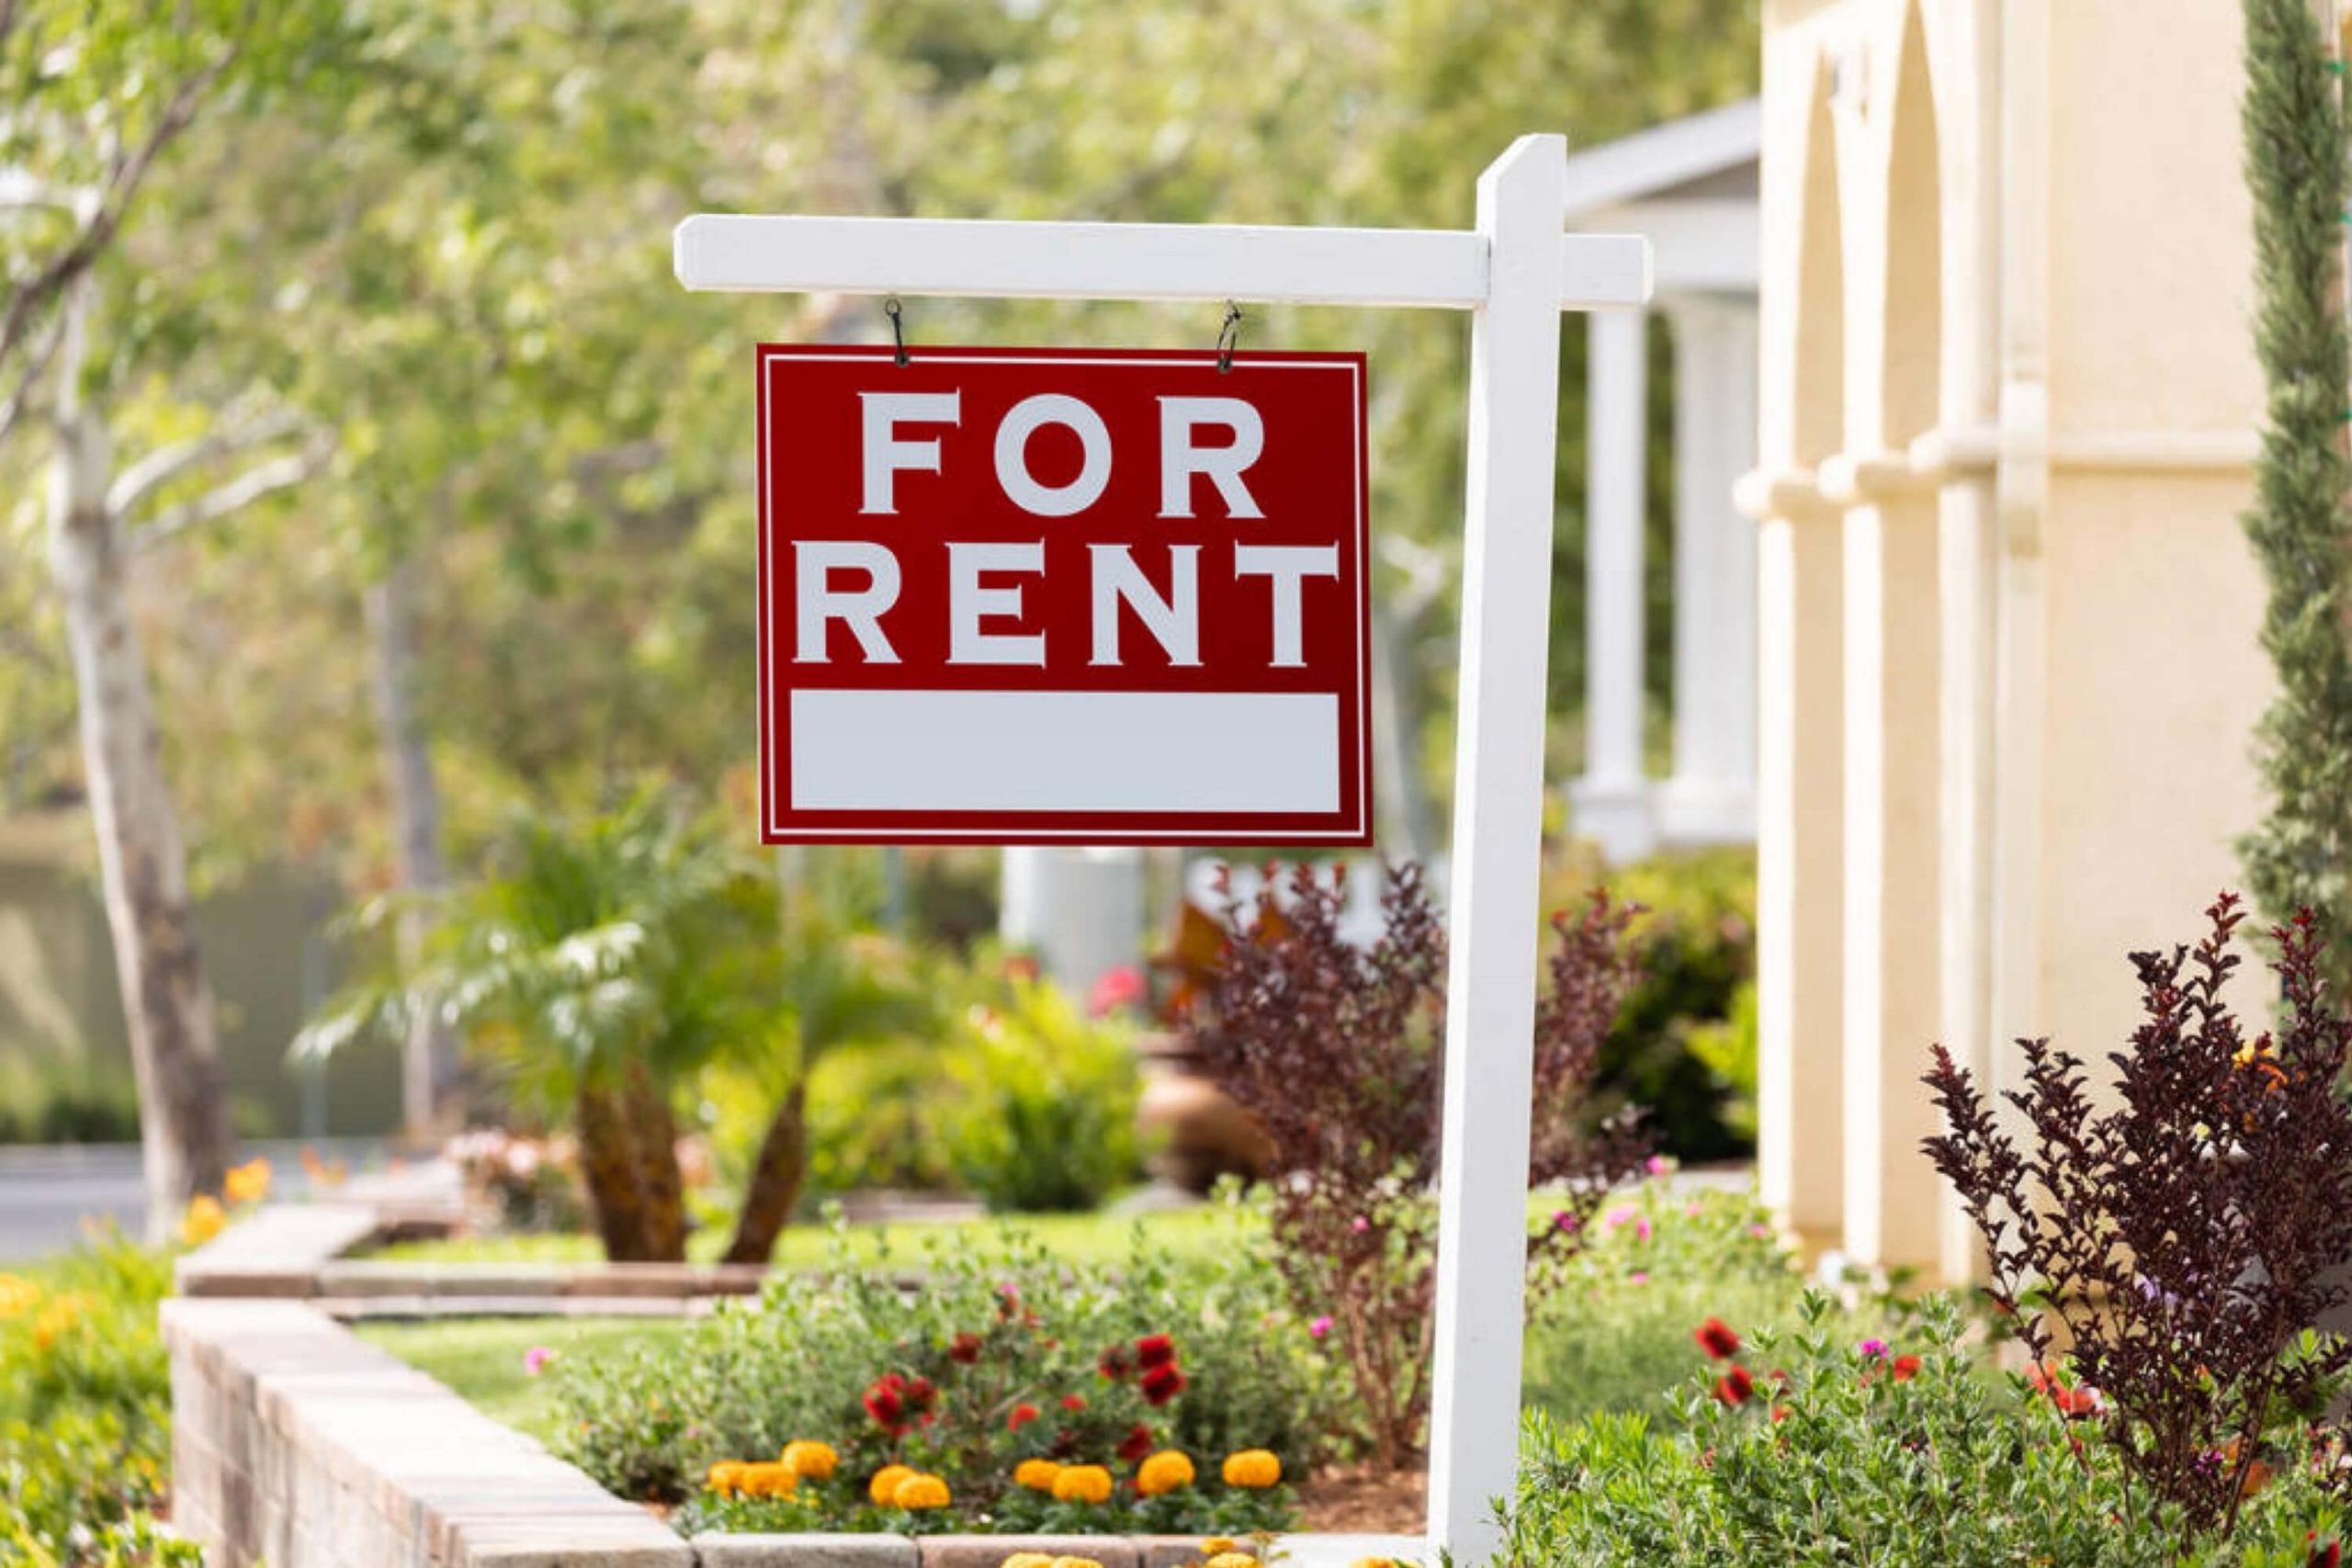 Renting Out Could be a Nightmare if You Don't Take Care of These Things